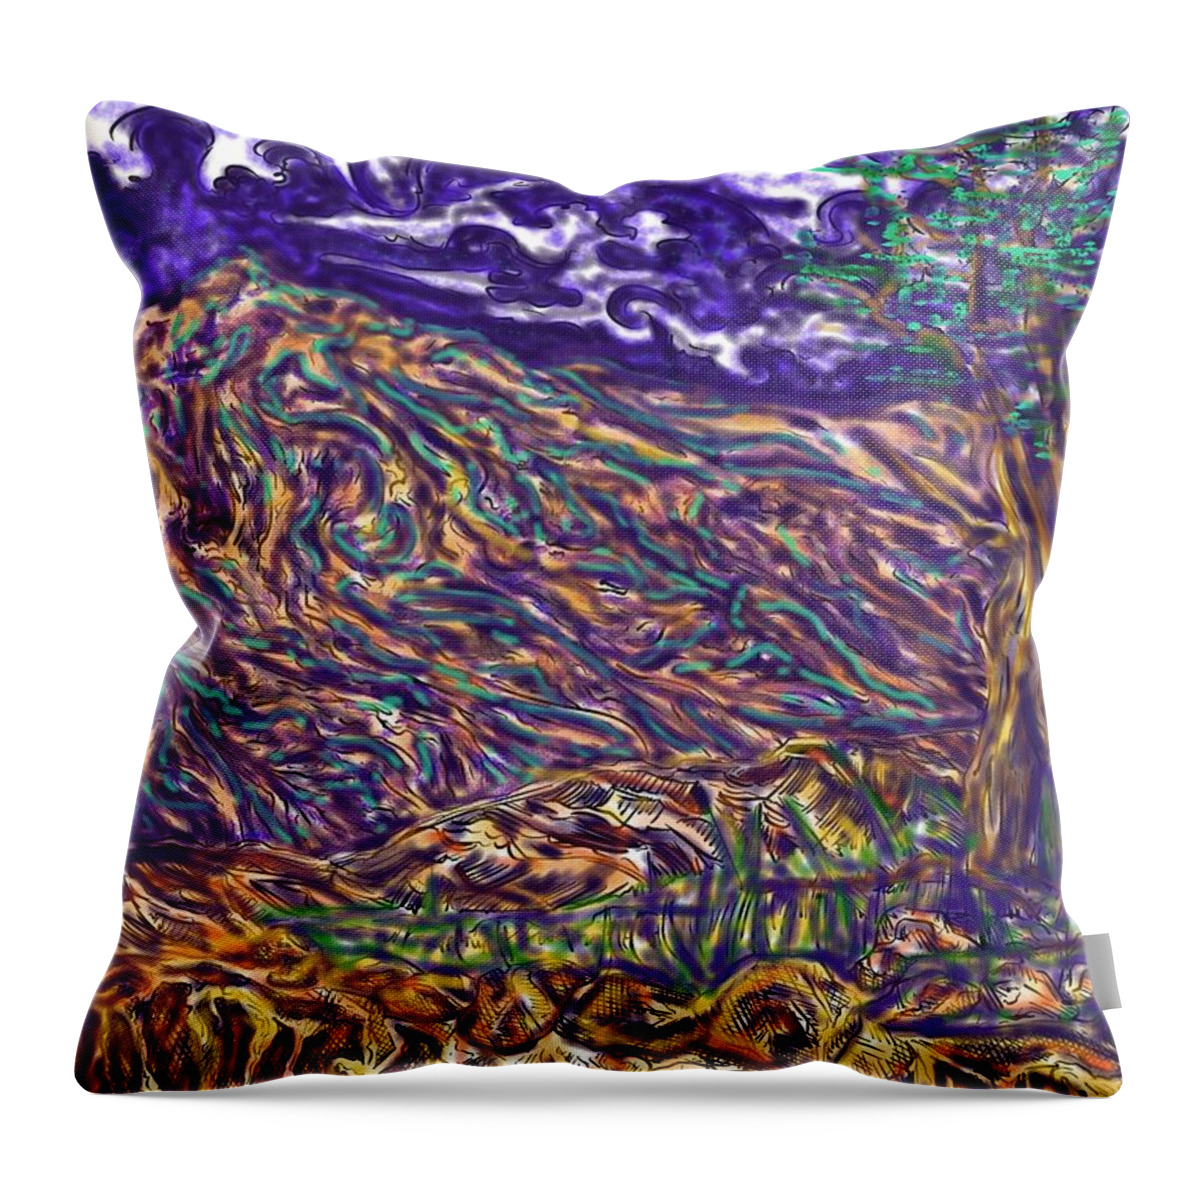 Landscape Throw Pillow featuring the digital art Pine Bluff by Angela Weddle